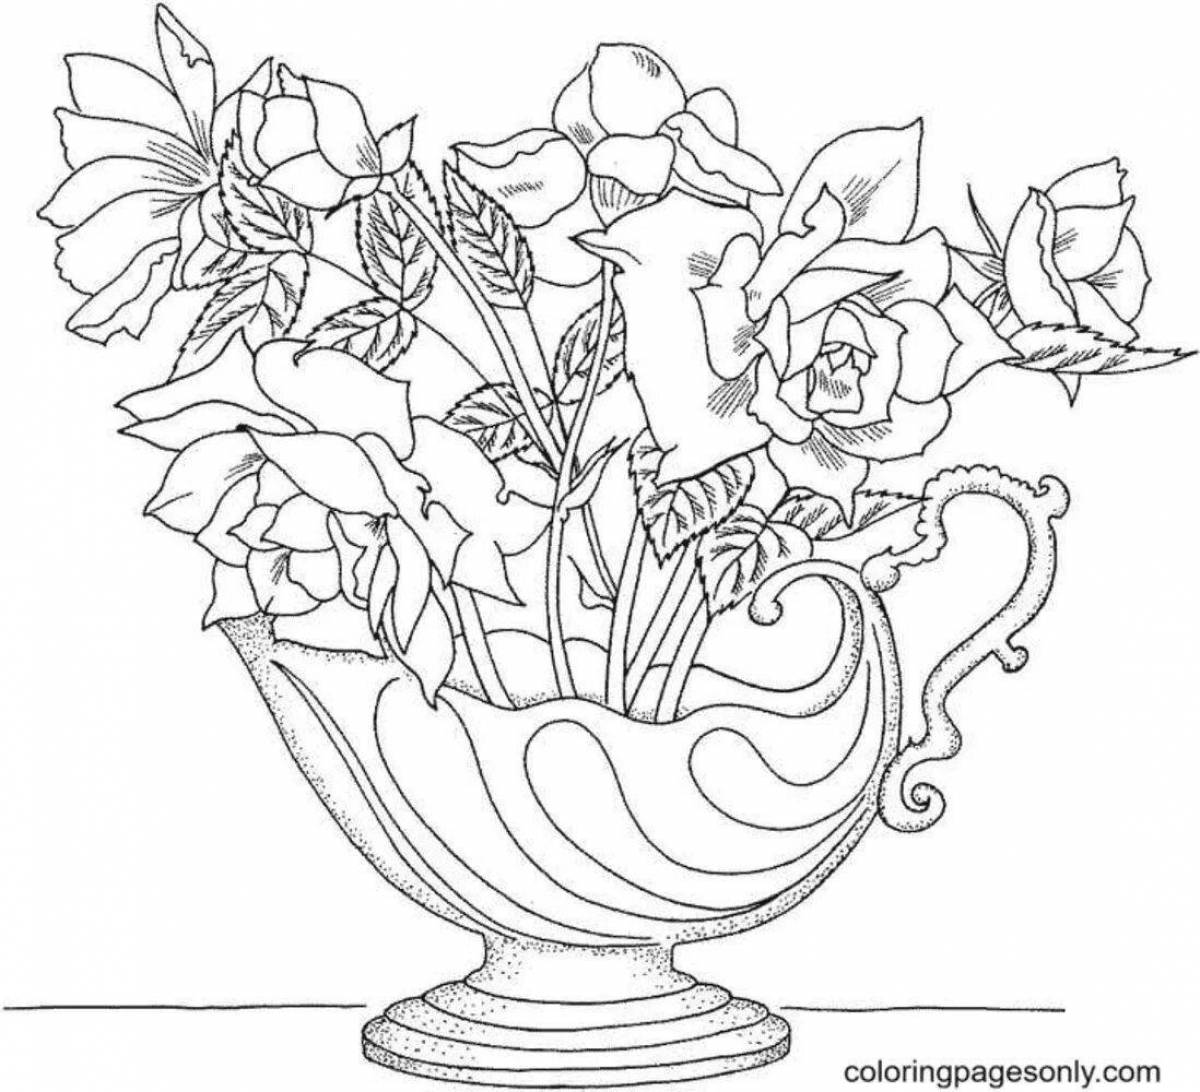 Coloring book glowing bouquet in a vase